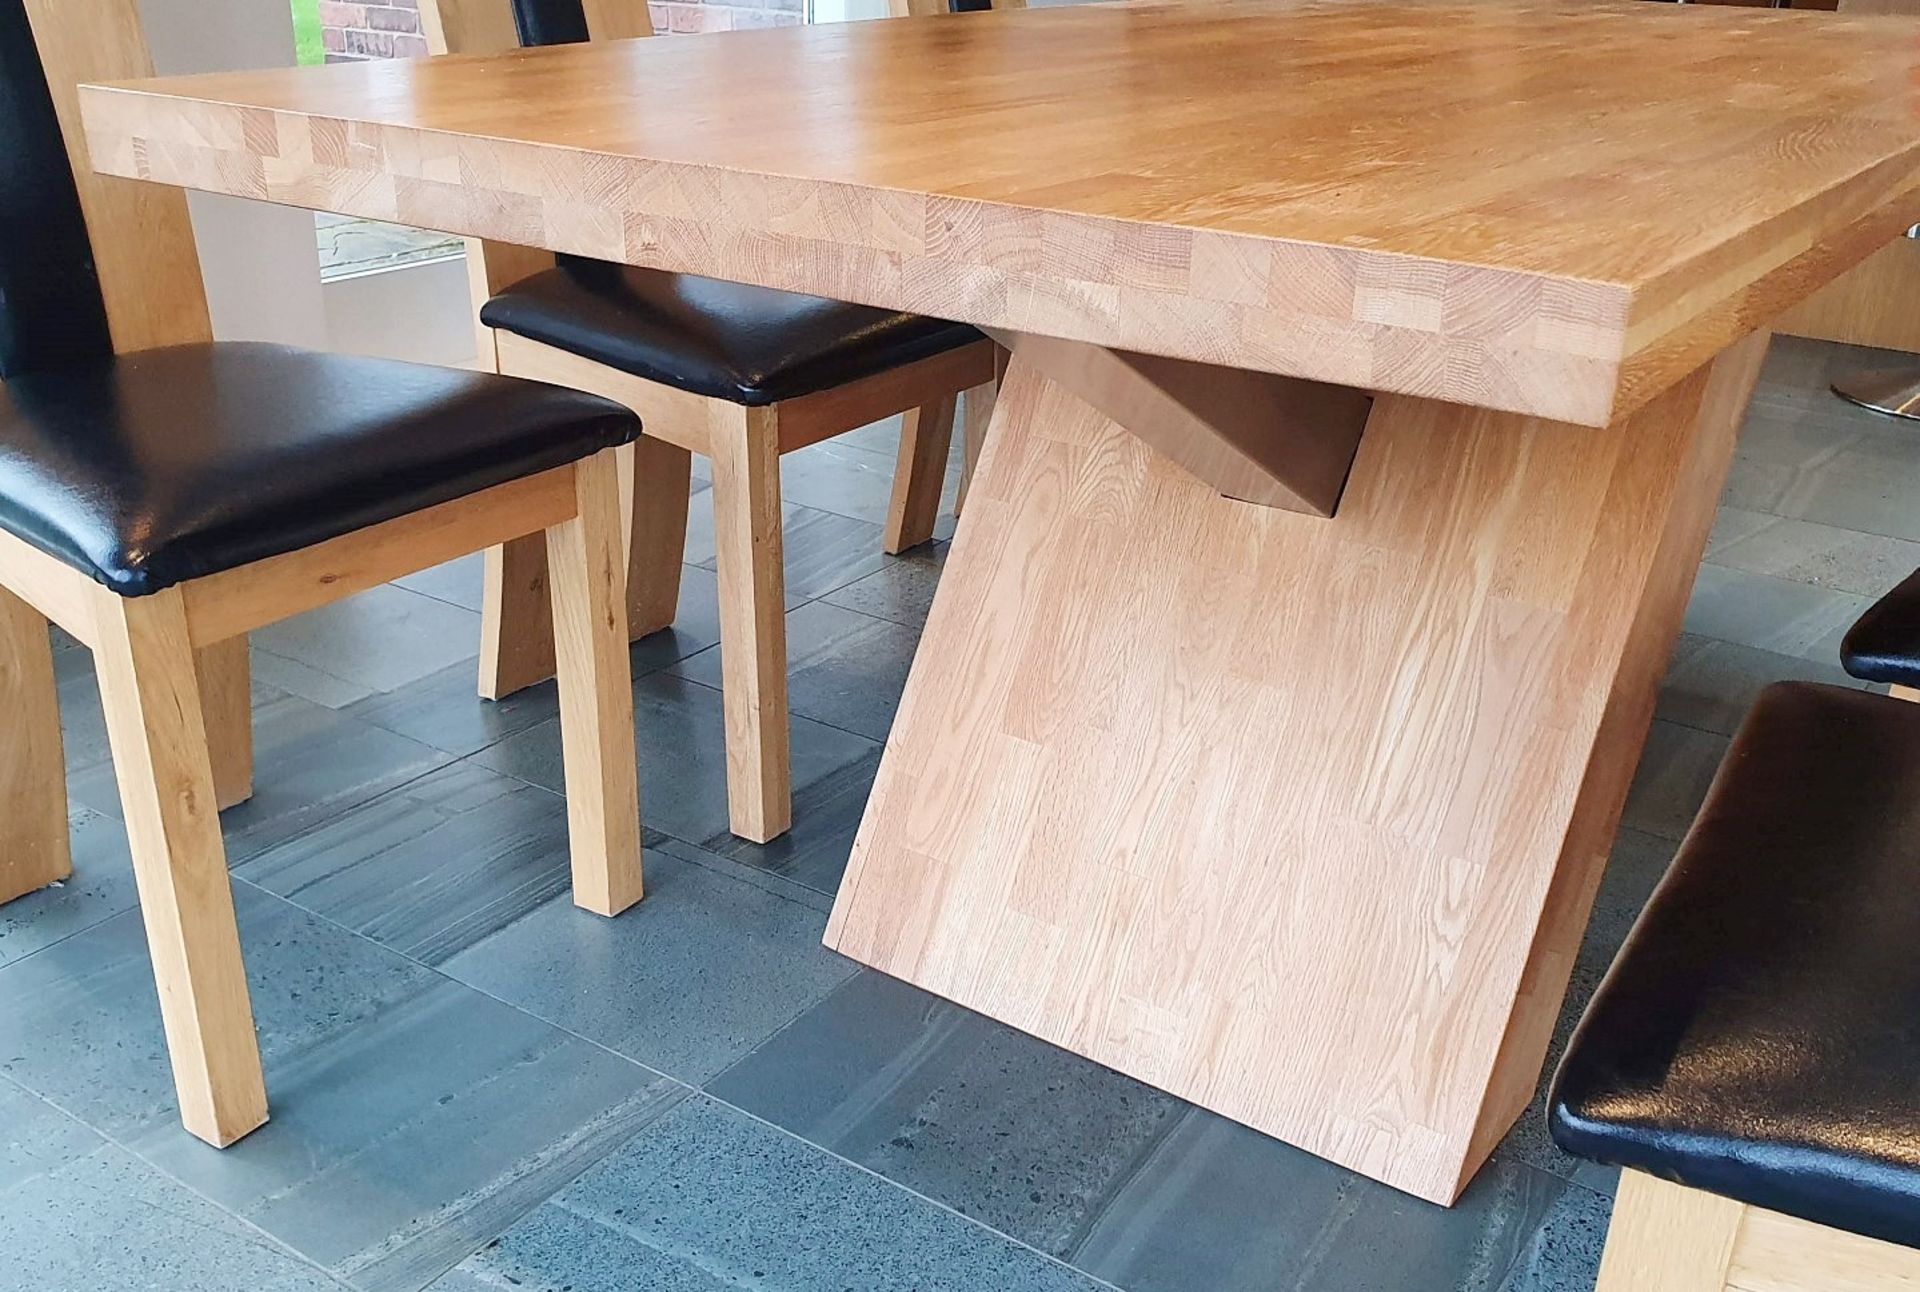 1 x Solid Oak 1.8 Metre Dining Table With 6 x High Back Dining Chairs - Pre-owned In Great Condition - Image 2 of 12